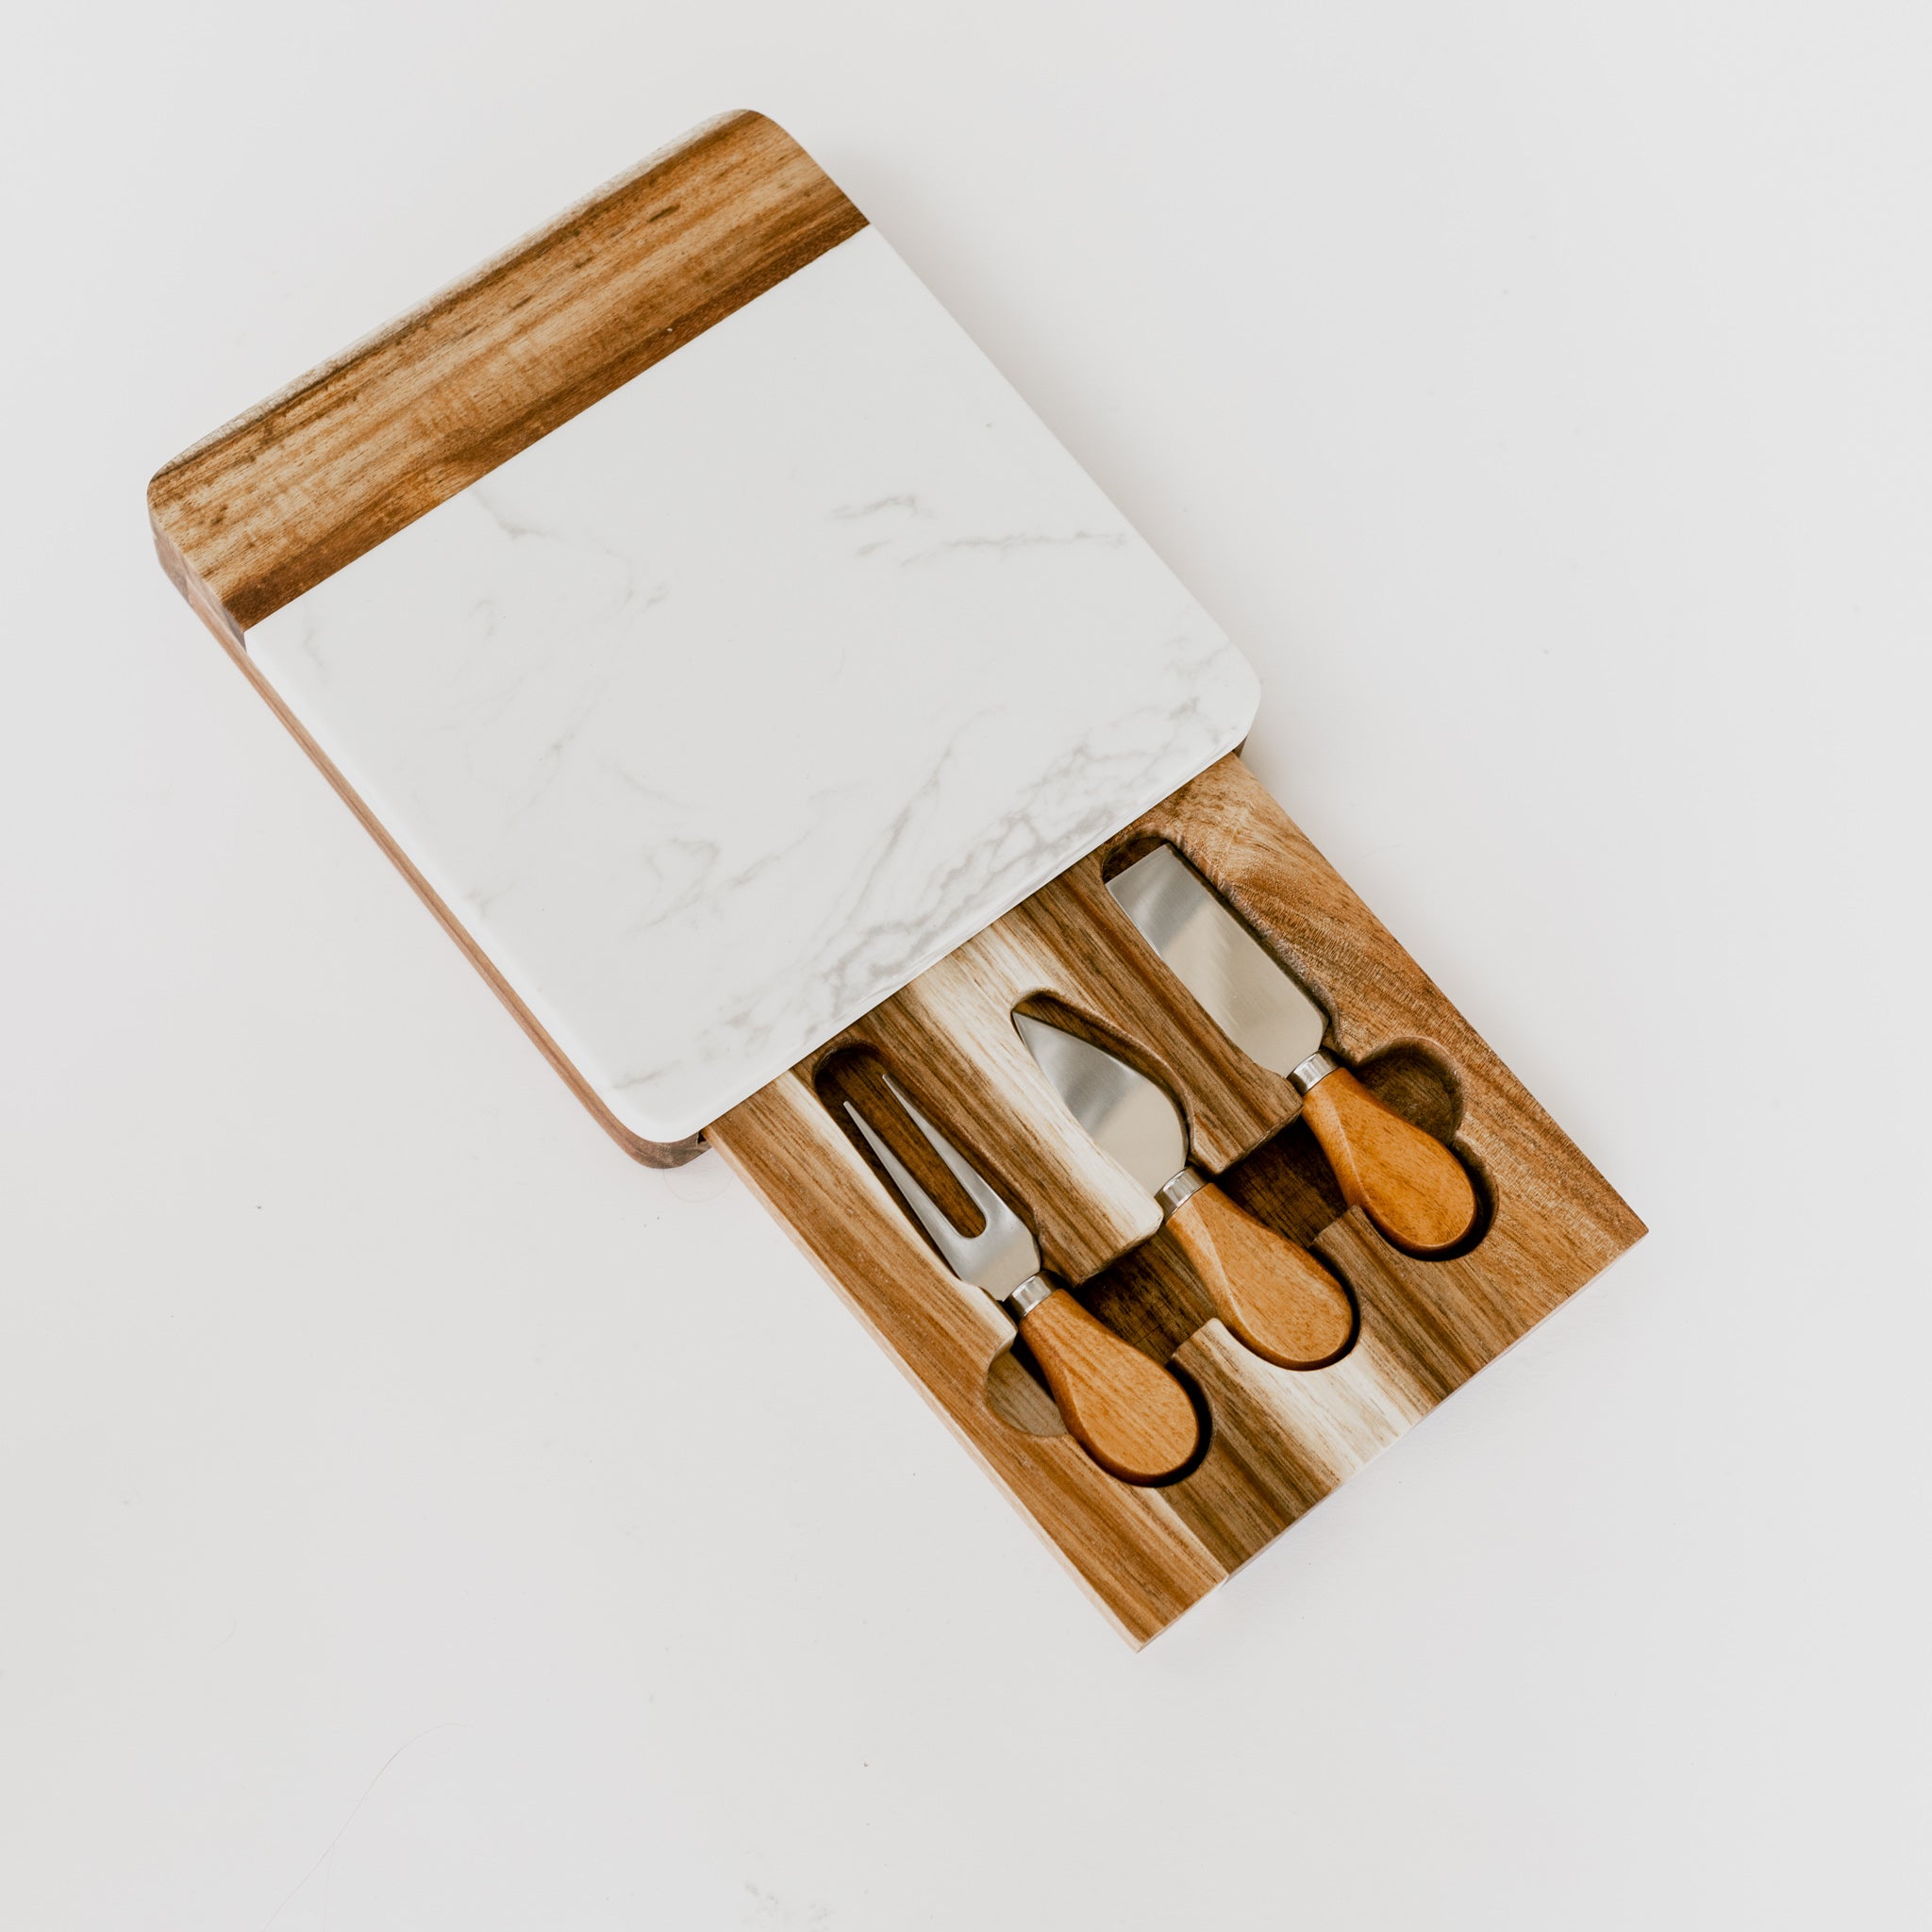 A white marble and acacia wood charcuterie board with a pull out drawer holding 3 stainless steel cheese knives against a white background